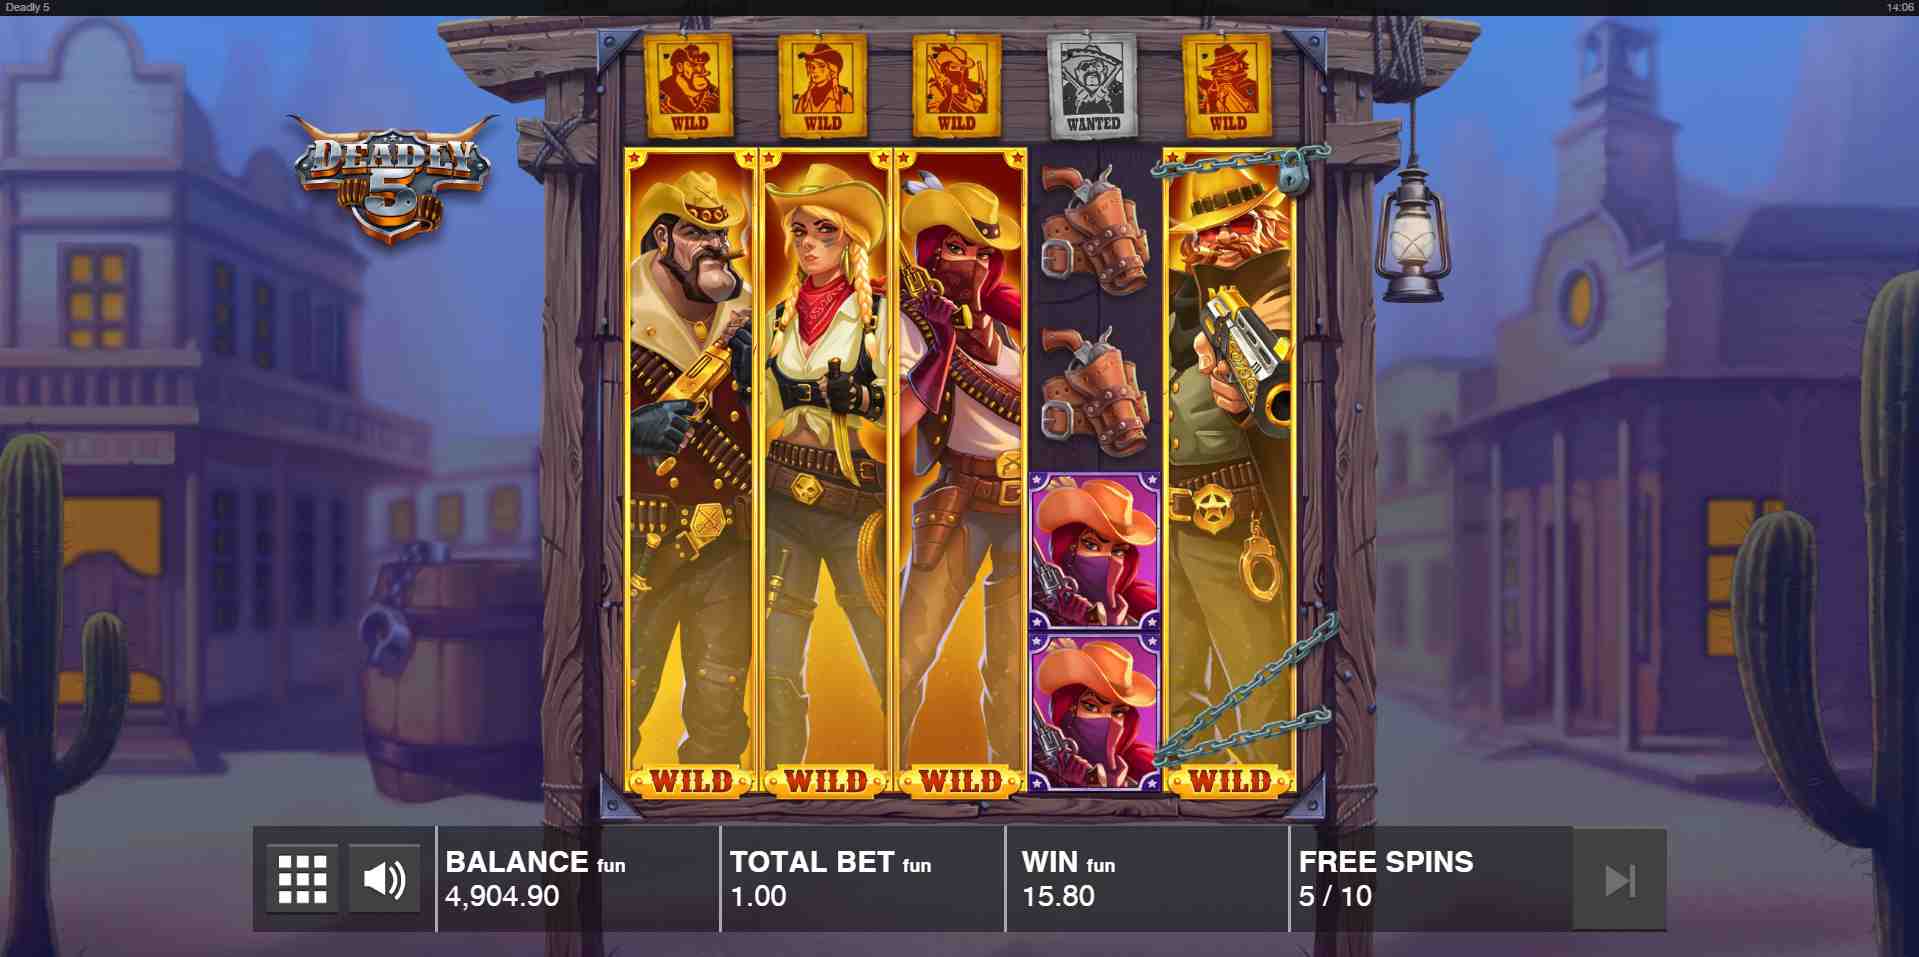 Deadly 5 Free Spins